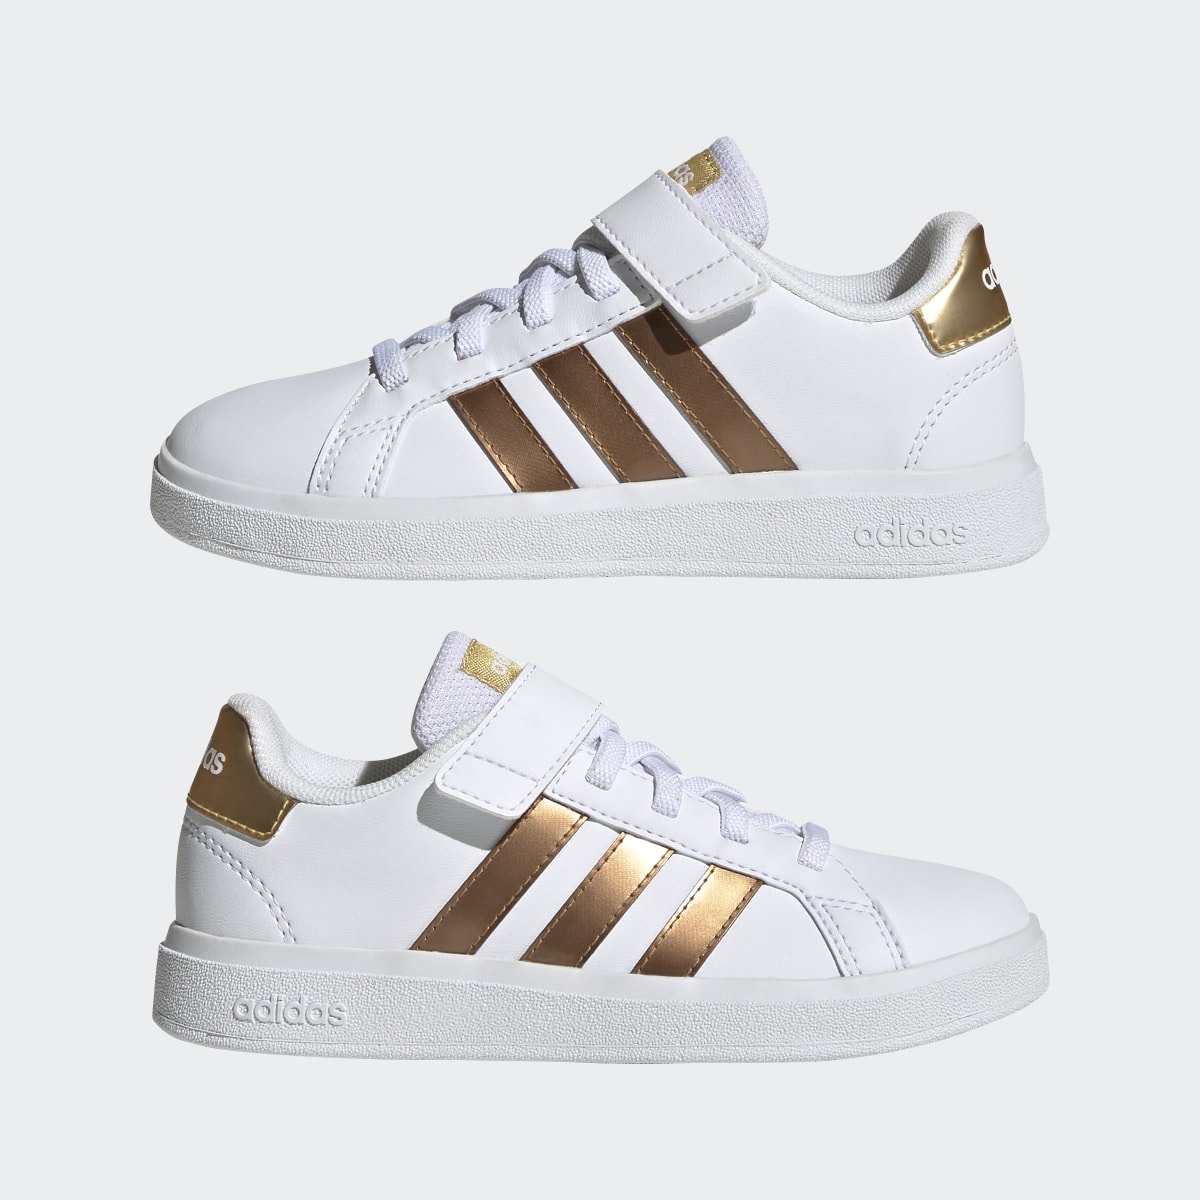 Adidas Grand Court Sustainable Lifestyle Court Elastic Lace and Top Strap Shoes. 8